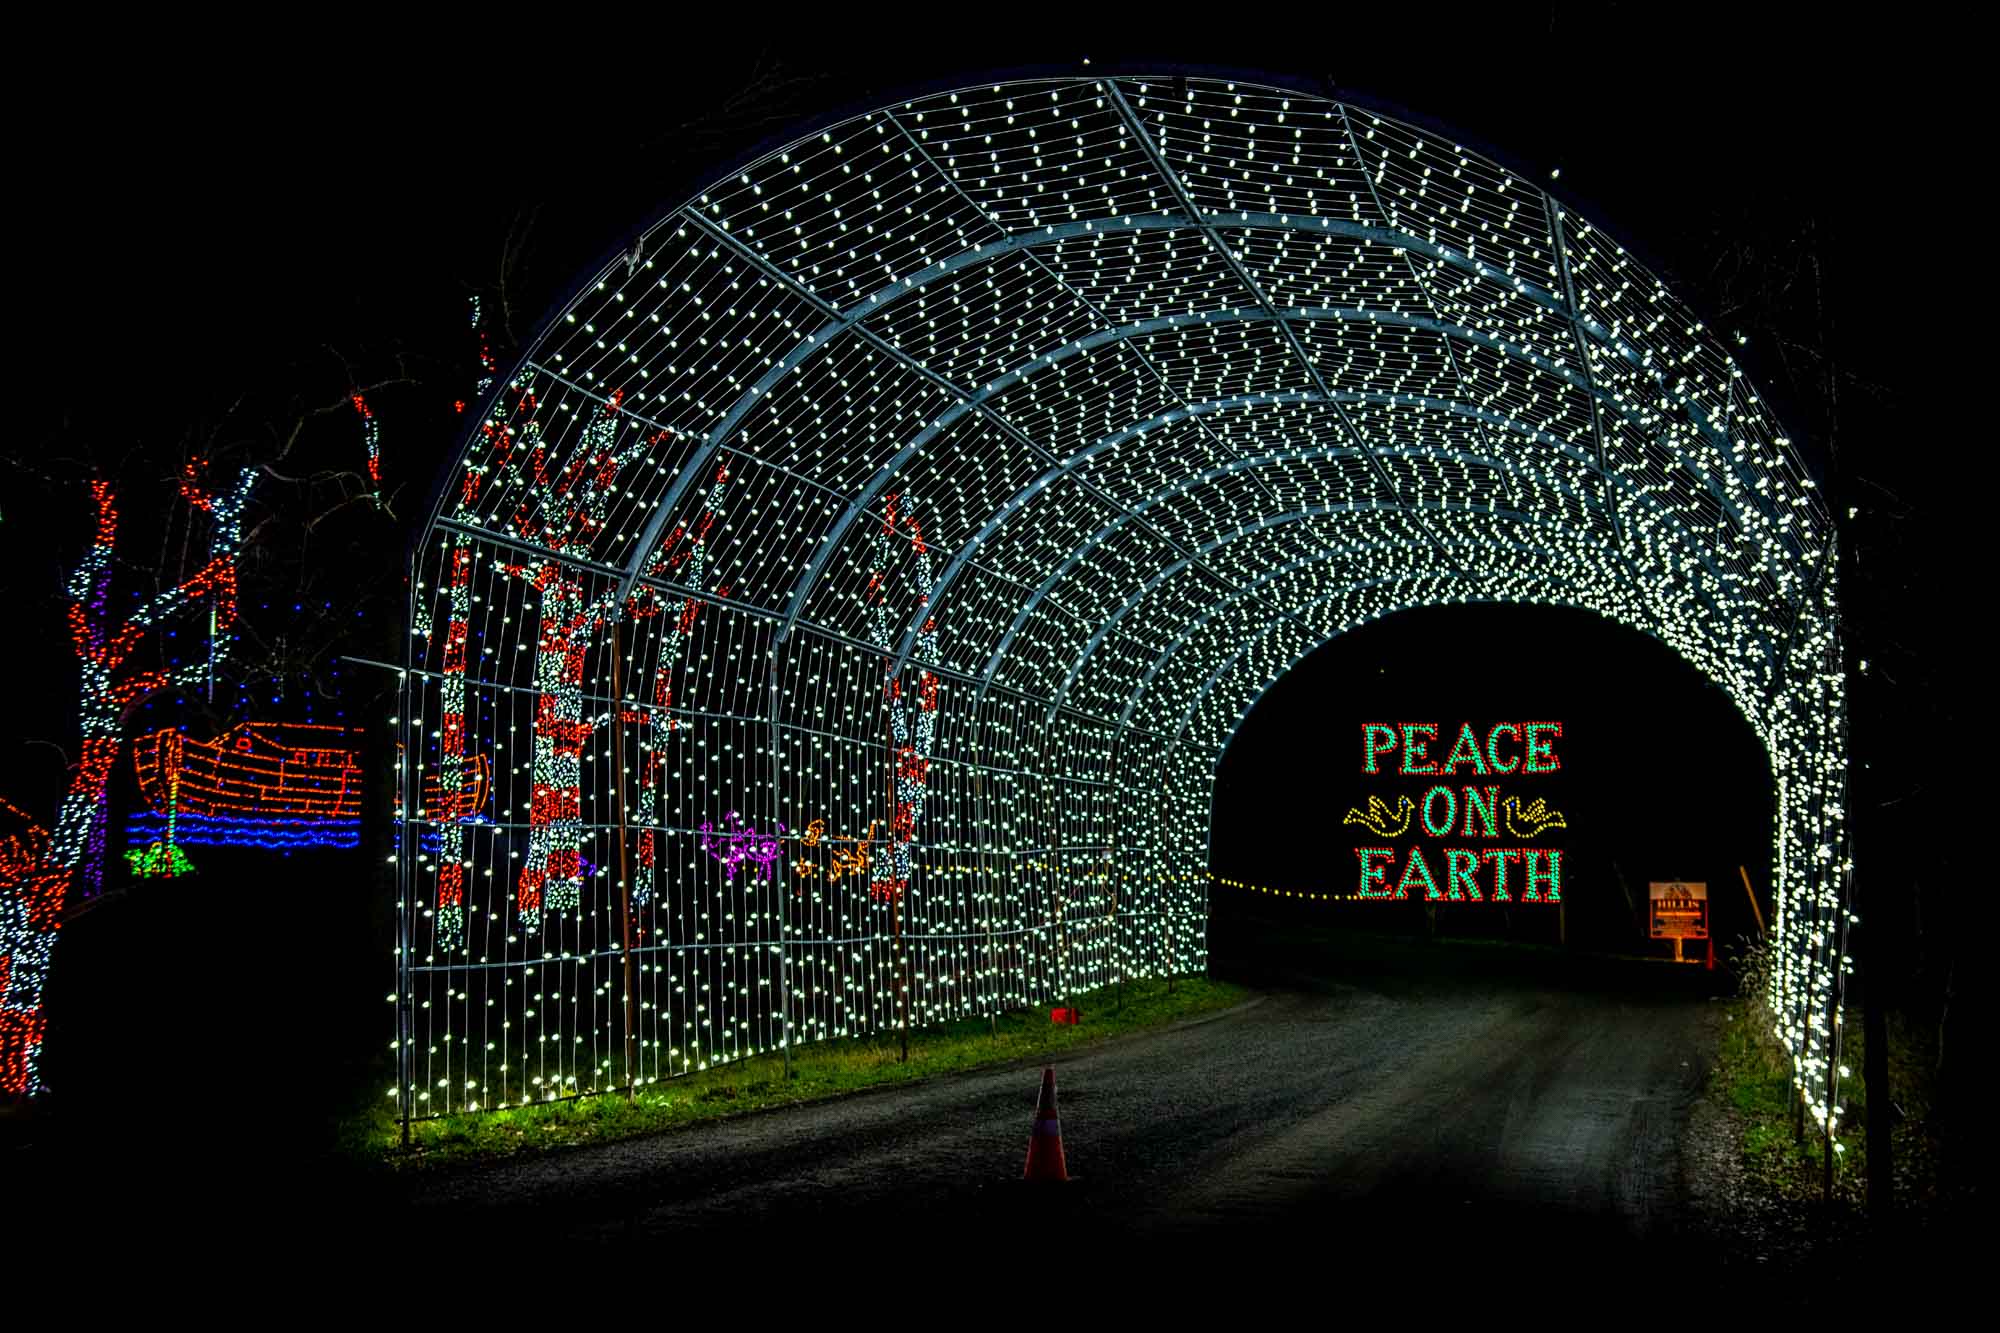 Drive thru tunnel of white lights with a "Peace on Earth" sign at the end